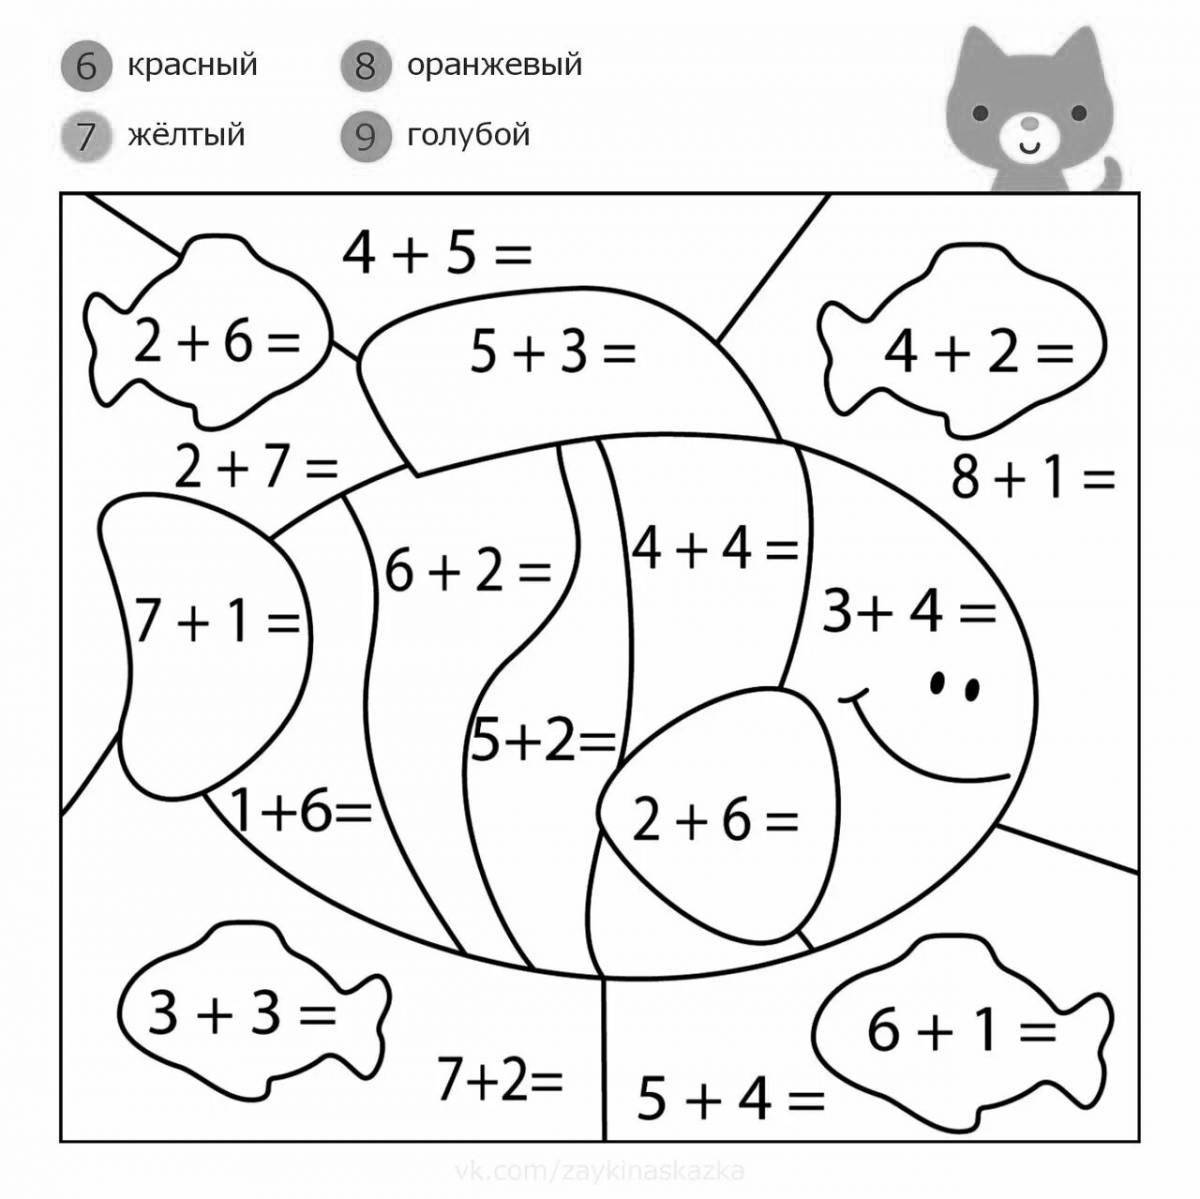 Relaxing math coloring book for 5-6 year olds